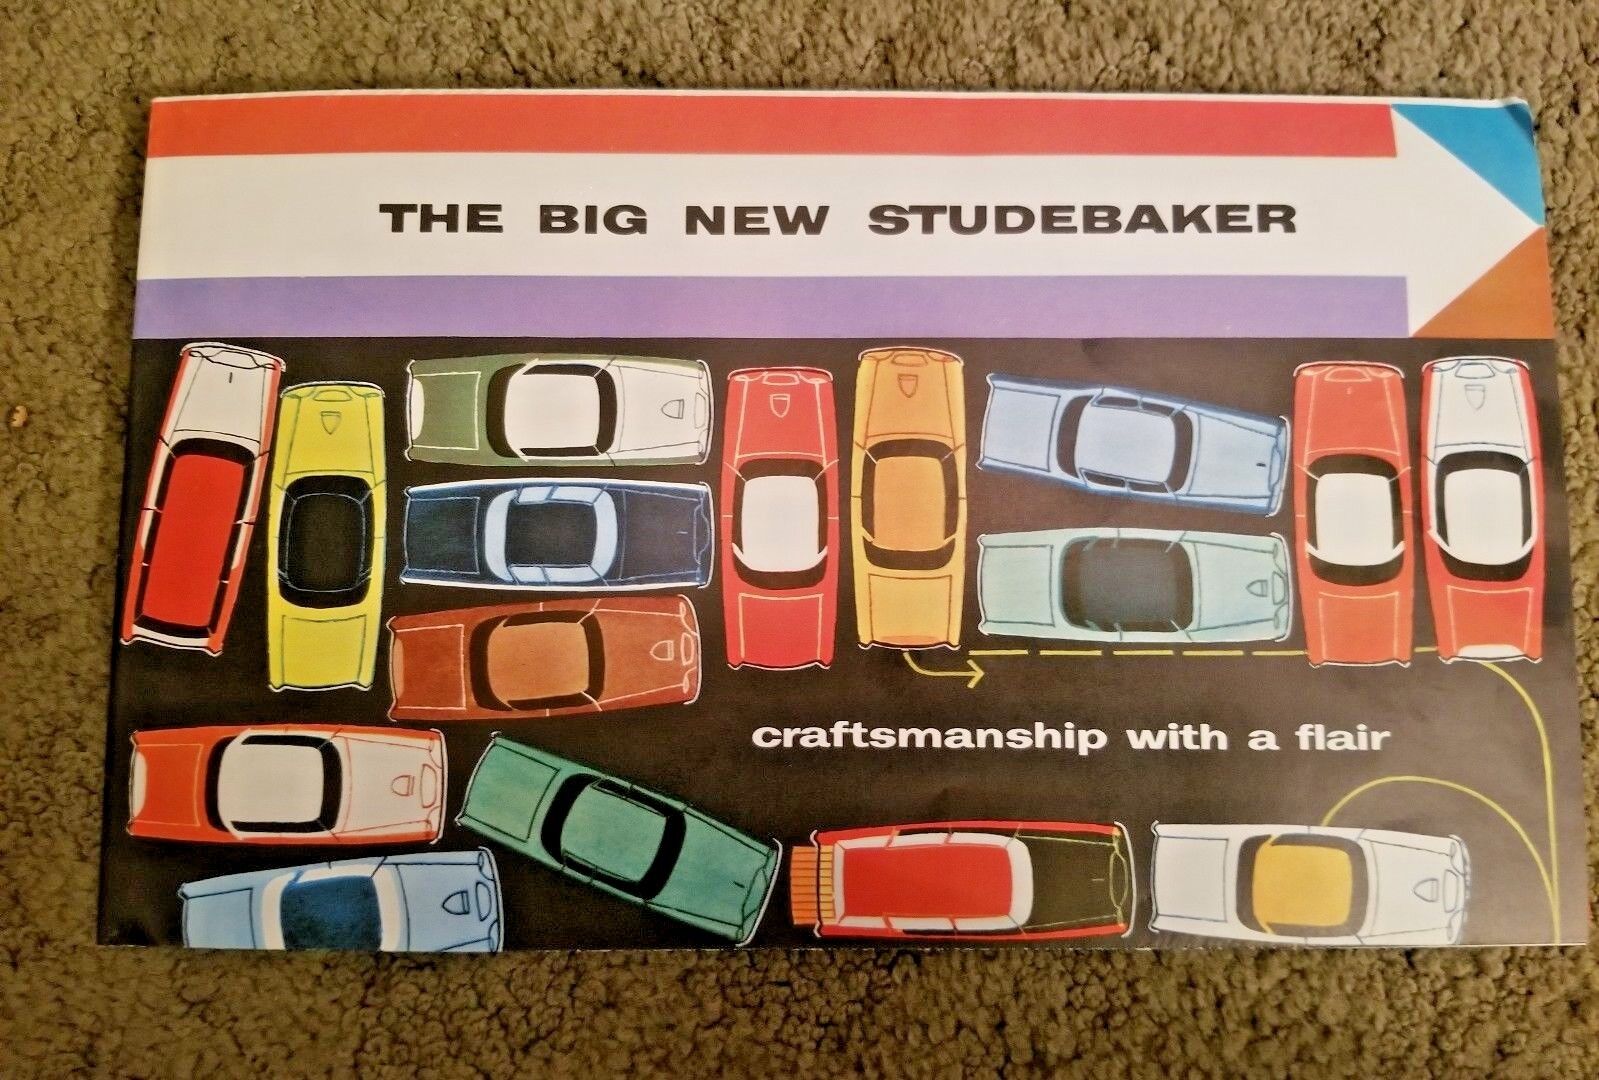 1956 The Big New Studebaker Automobile Brochure Craftsmanship With A Flair